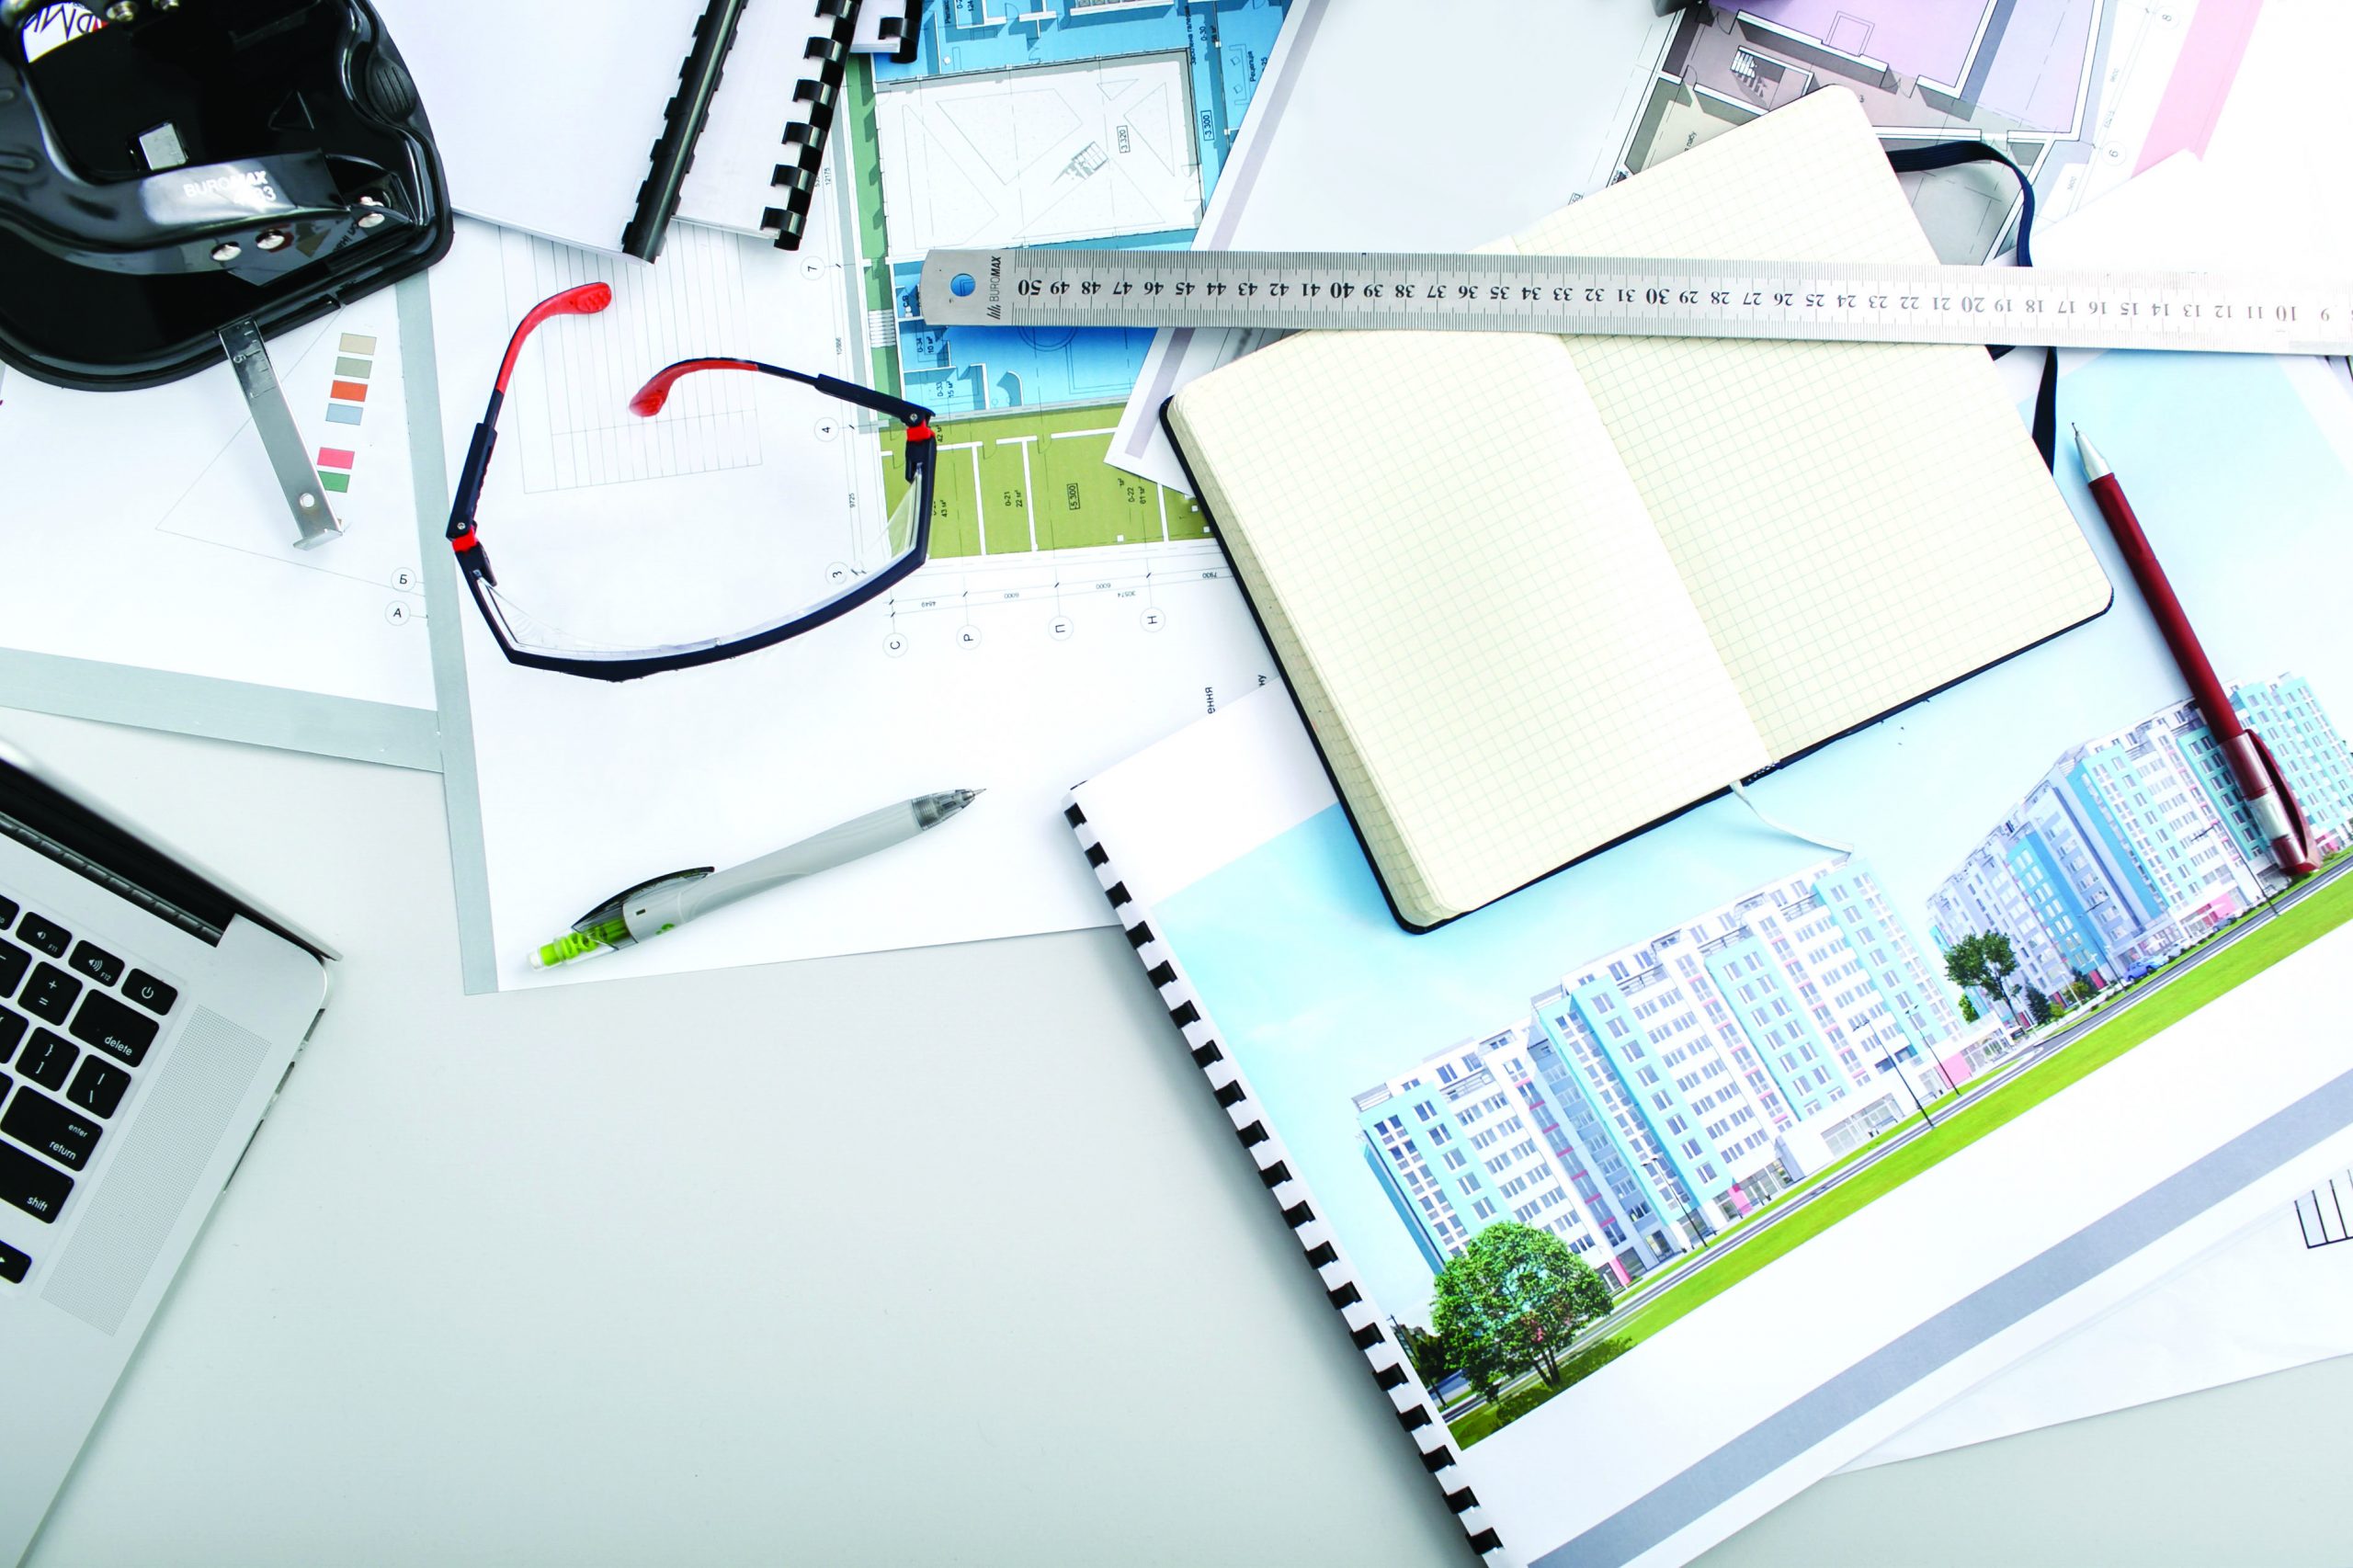 Maps, notebook, ruler and pens lie on office table